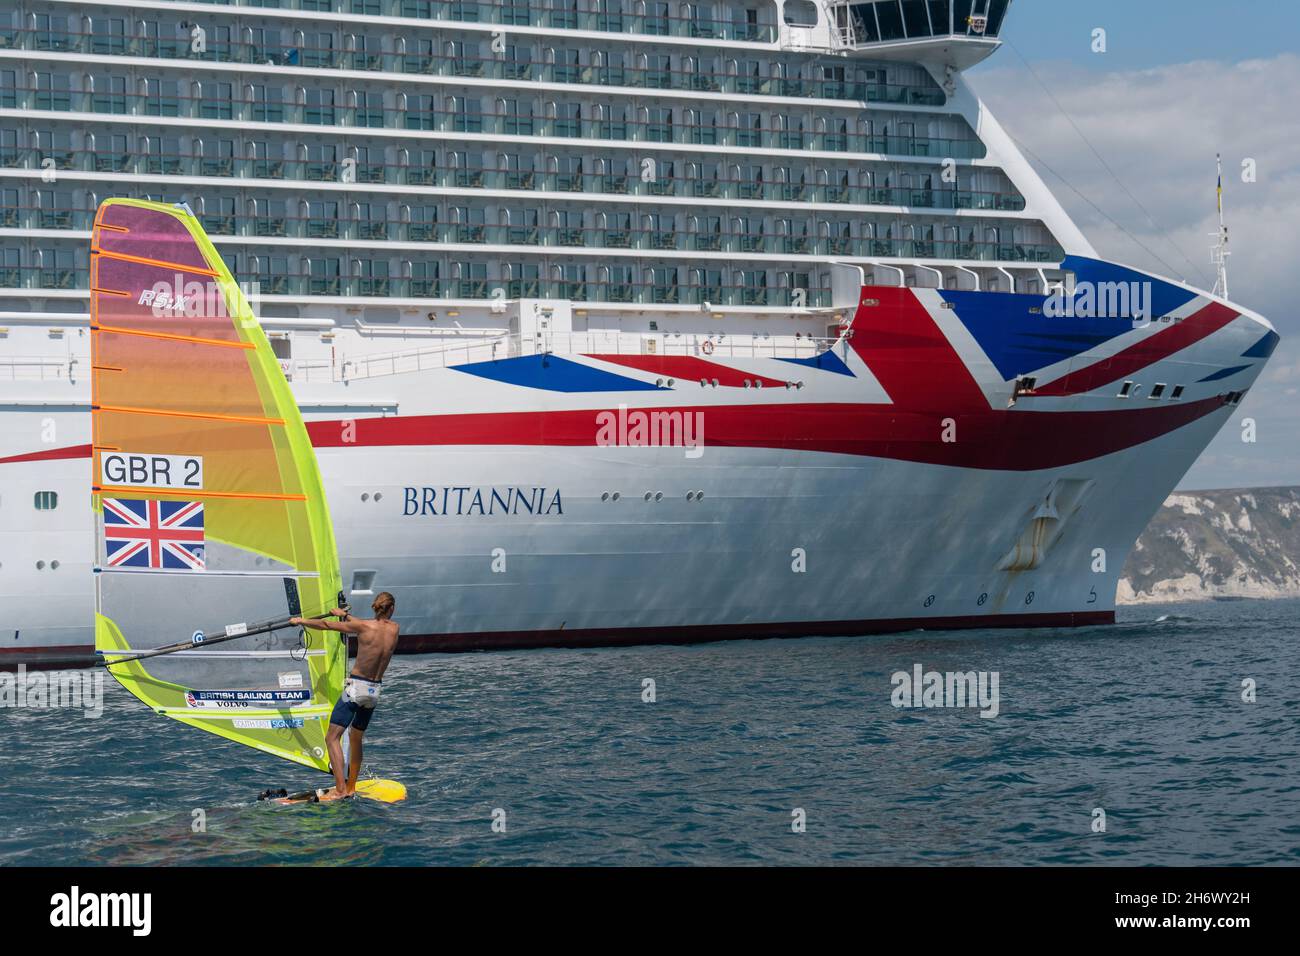 Tom Squires windsurfing past the MV Britannia P&O cruise ship at Weymouth Bay on the 21st July 2020 in Portland, Dorset in the United Kingdom. Stock Photo